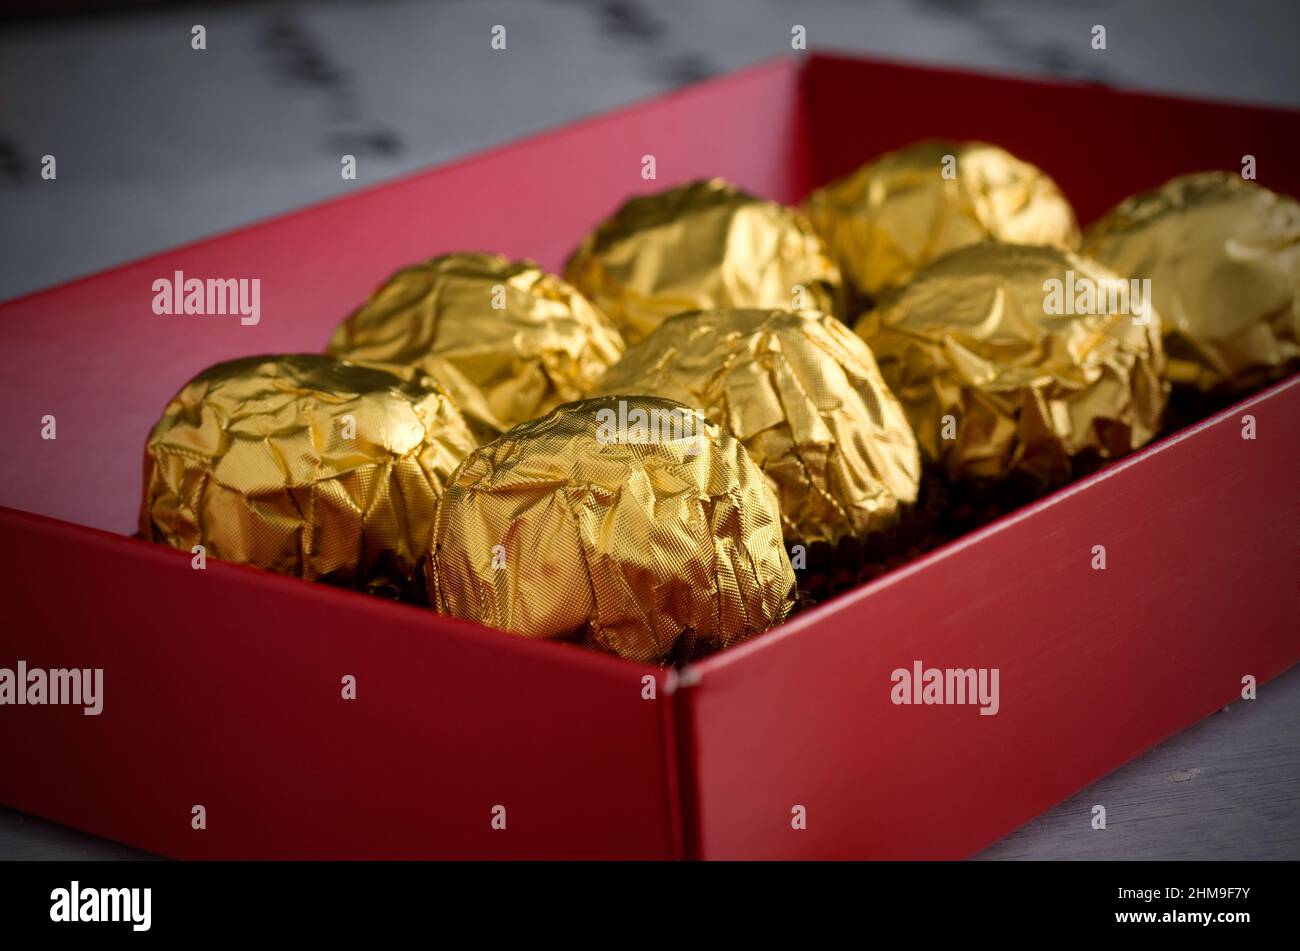 Chocolate Sweets Nuts Golden Wrapper On Stock Photo 621488513